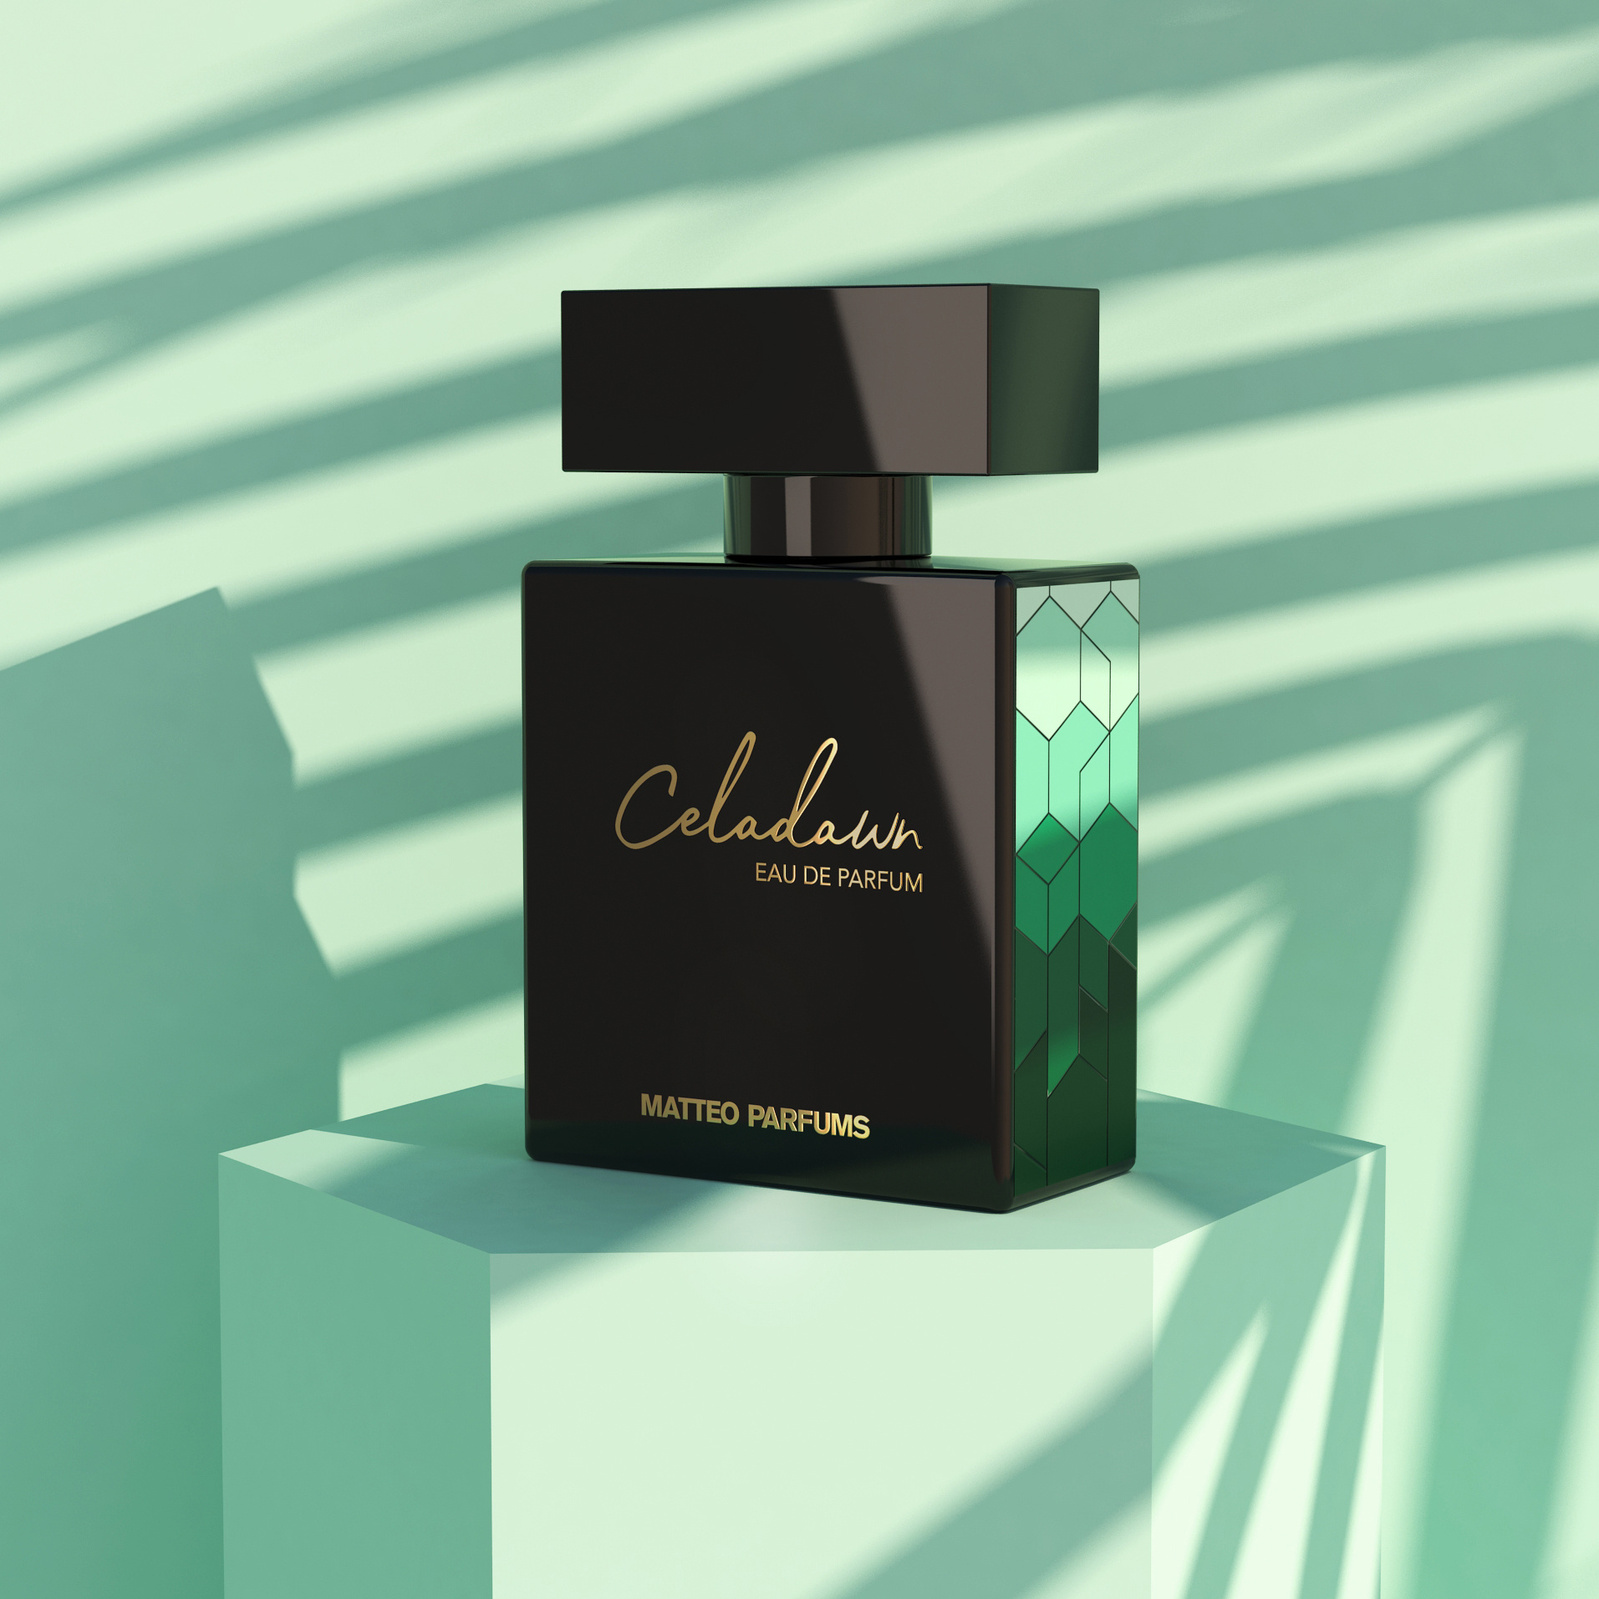 Studio photo of the debut fragrance from MATTEO PARFUMS, Celadawn, in its full sized option. Shot against a mint green background and palm leaf shadows casting against the beautiful Celadawn bottle